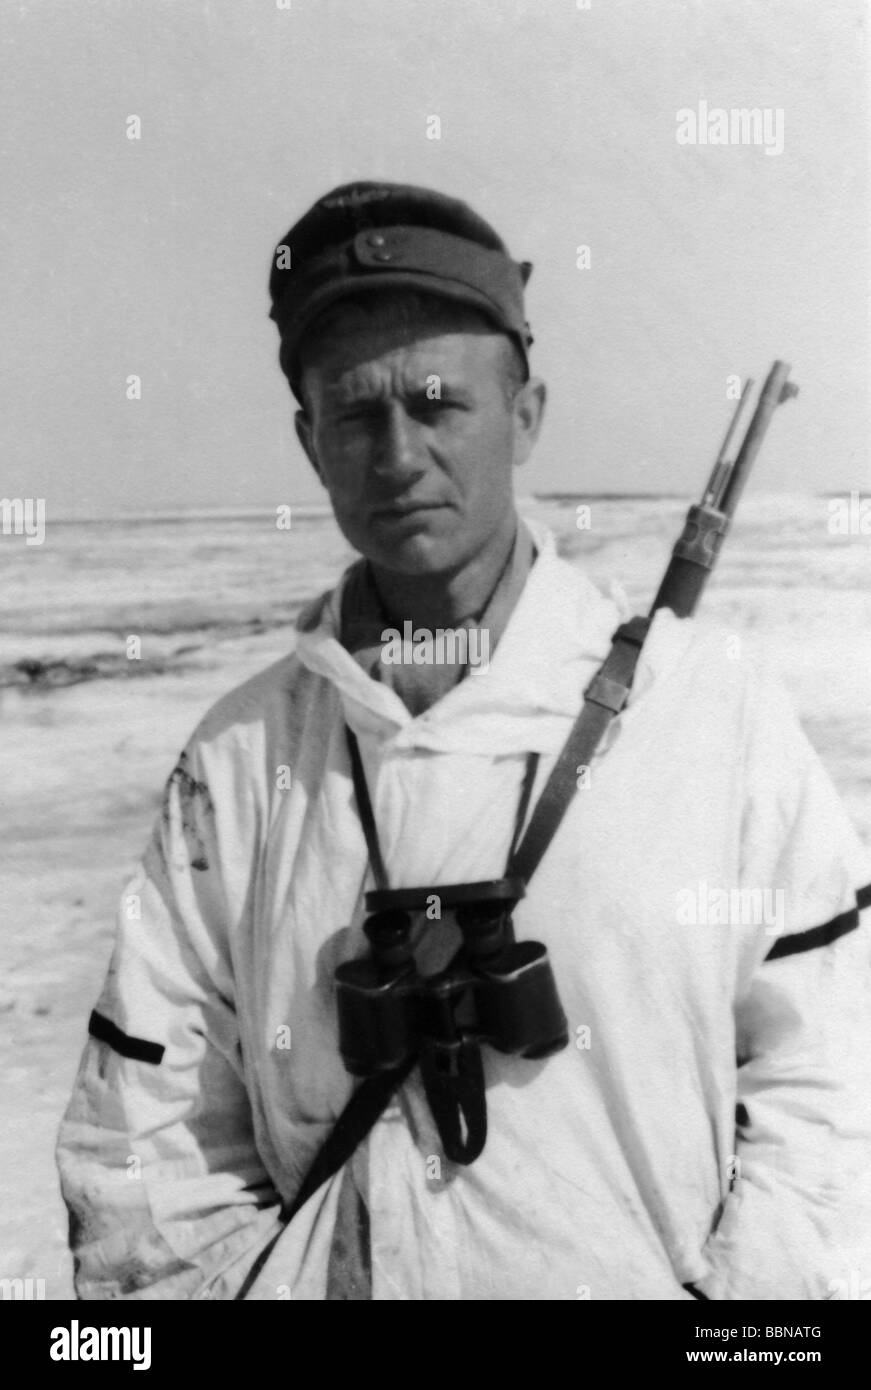 German soldier in winter Black and White Stock Photos & Images - Alamy